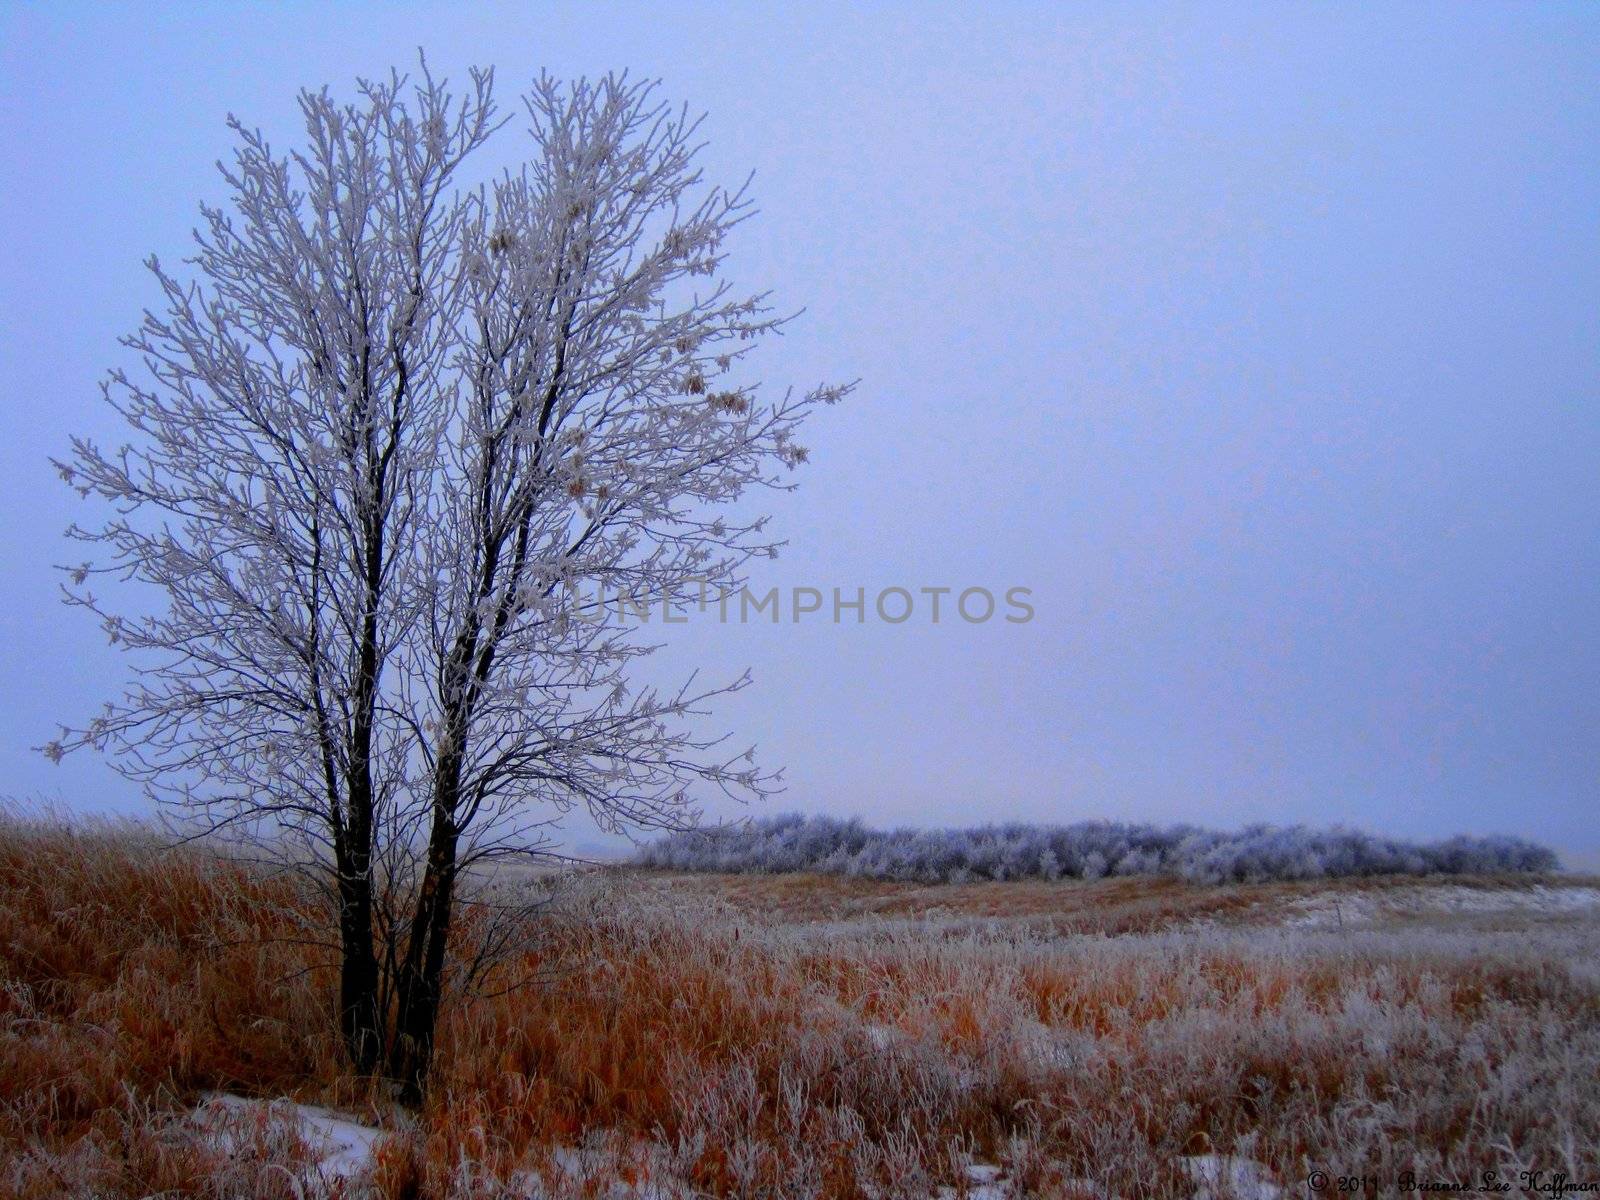 Frosted Prairie by BrianneLeeHoffman